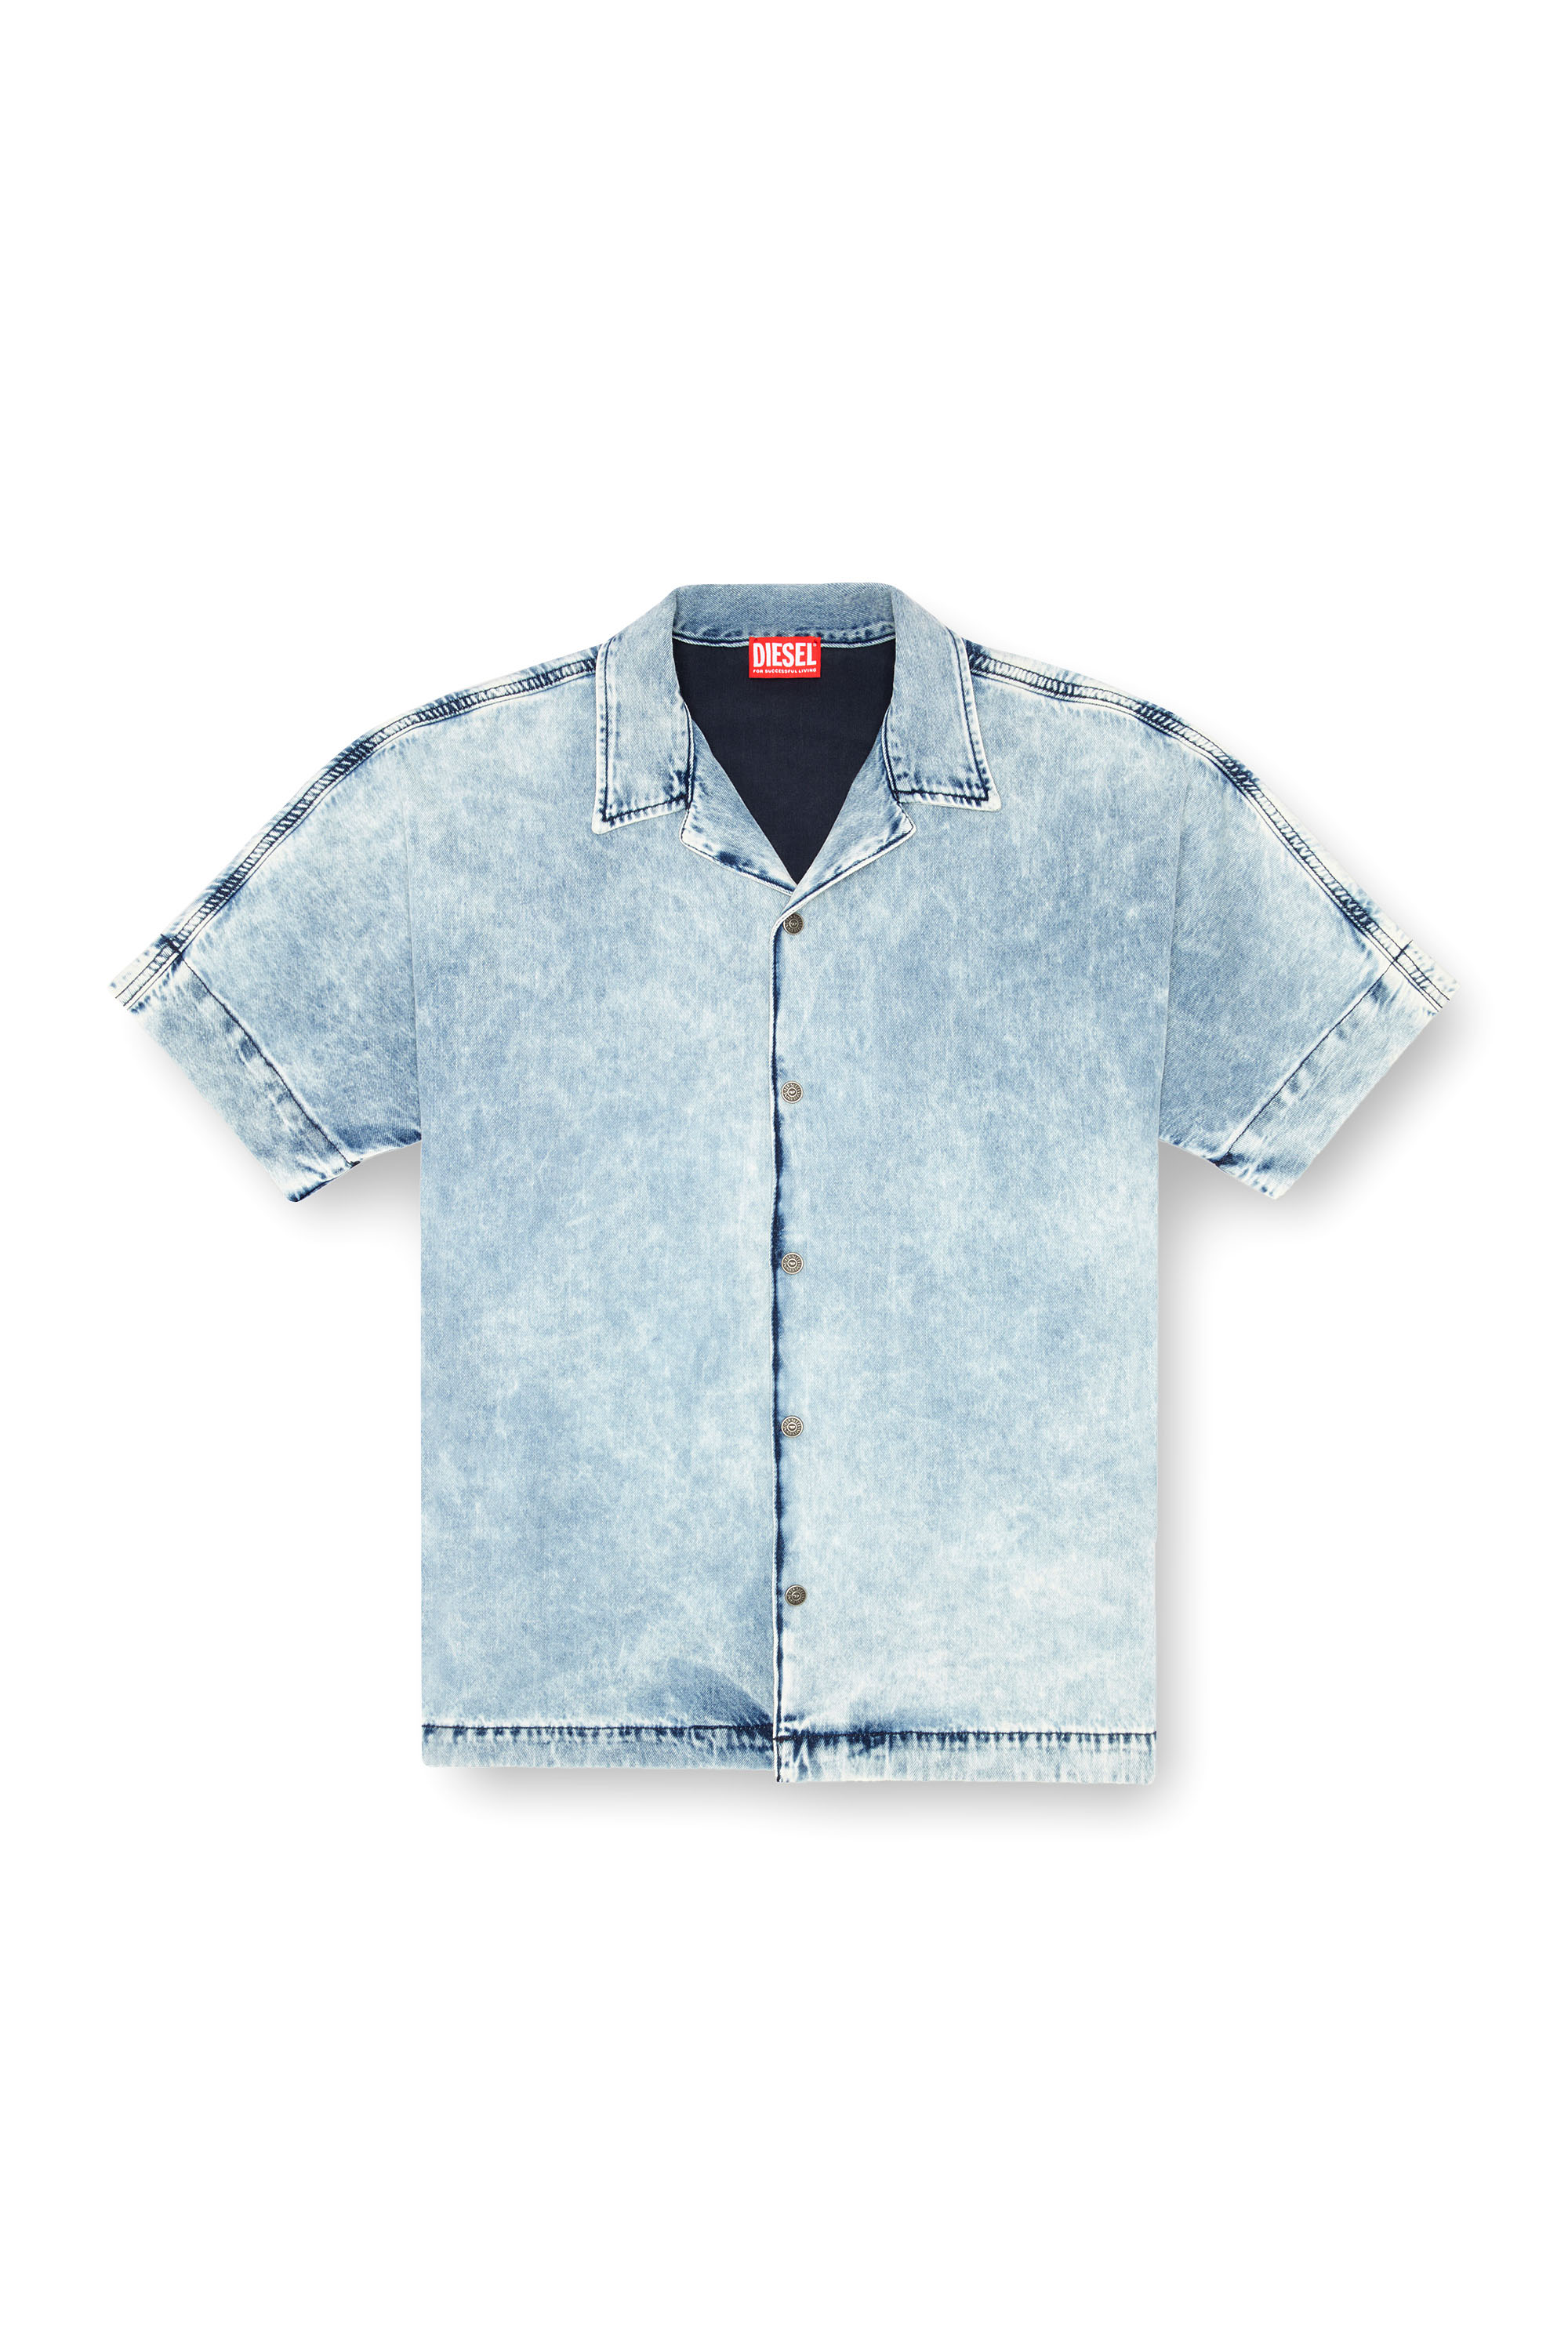 Diesel - D-NABIL-S, Man Denim bowling shirt with Oval D in Blue - Image 5